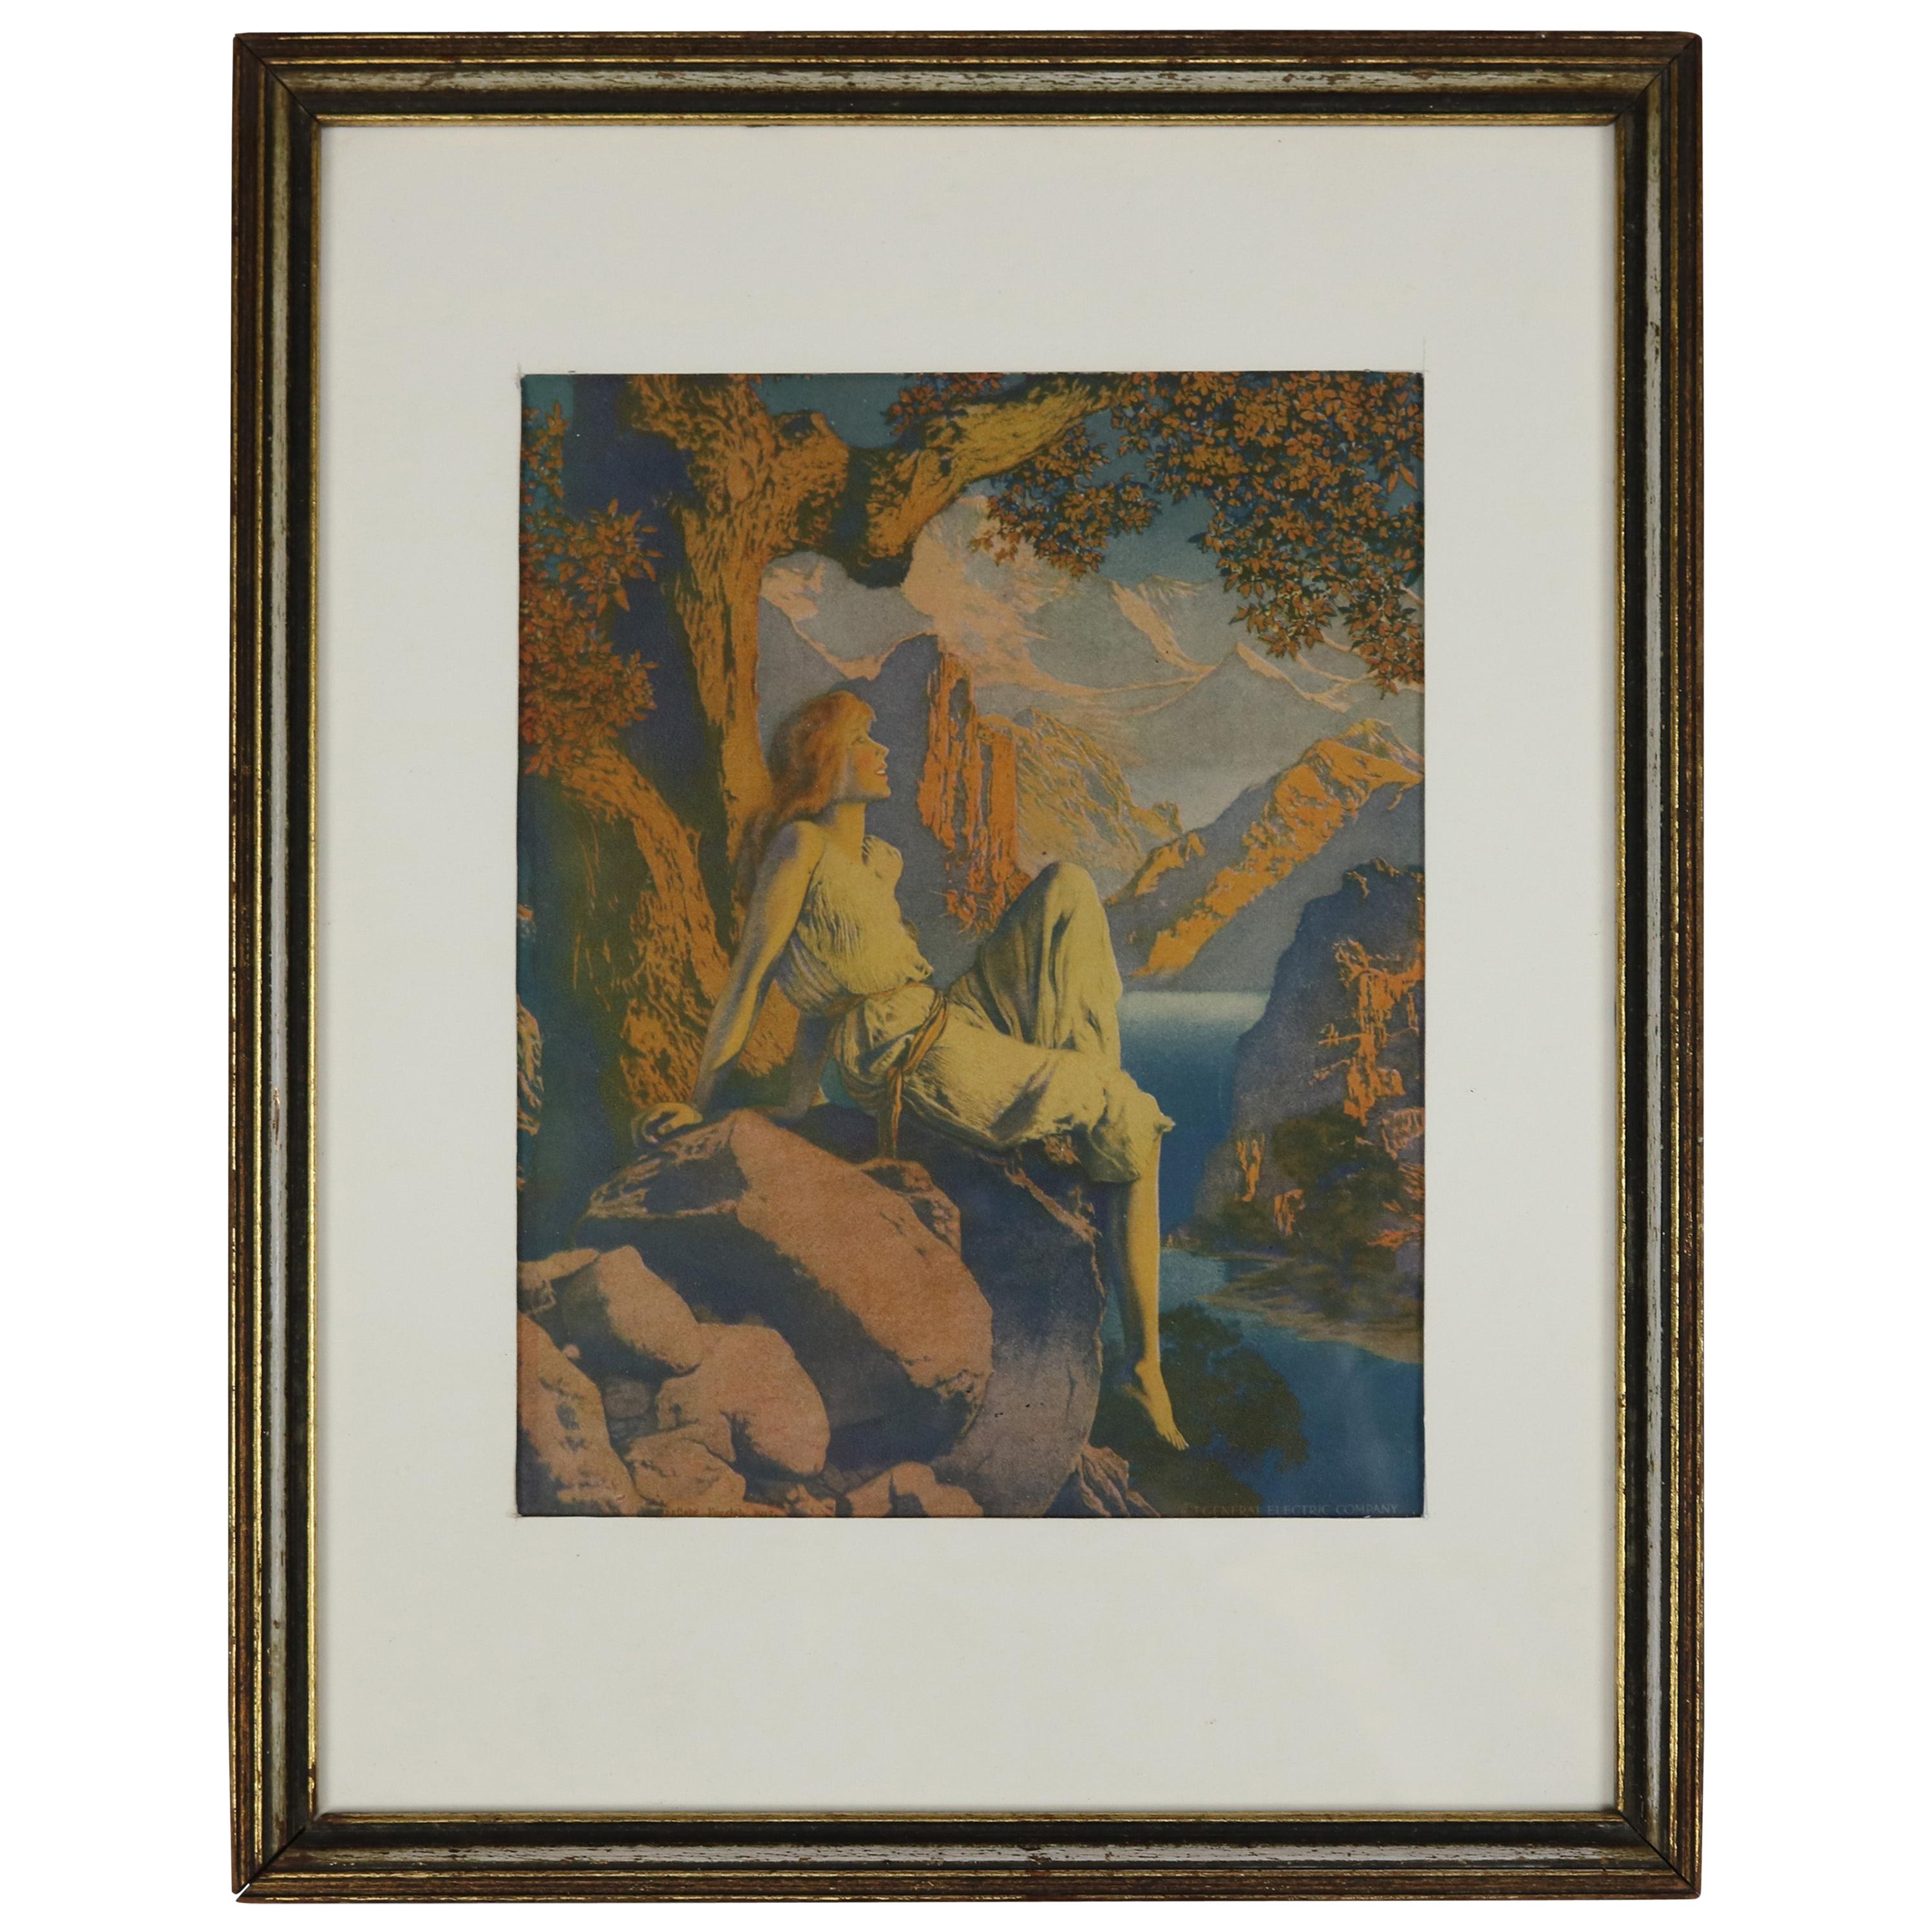 Art Deco Antique & Early Print 'Dawn' after Original by Maxfield Parrish, Framed